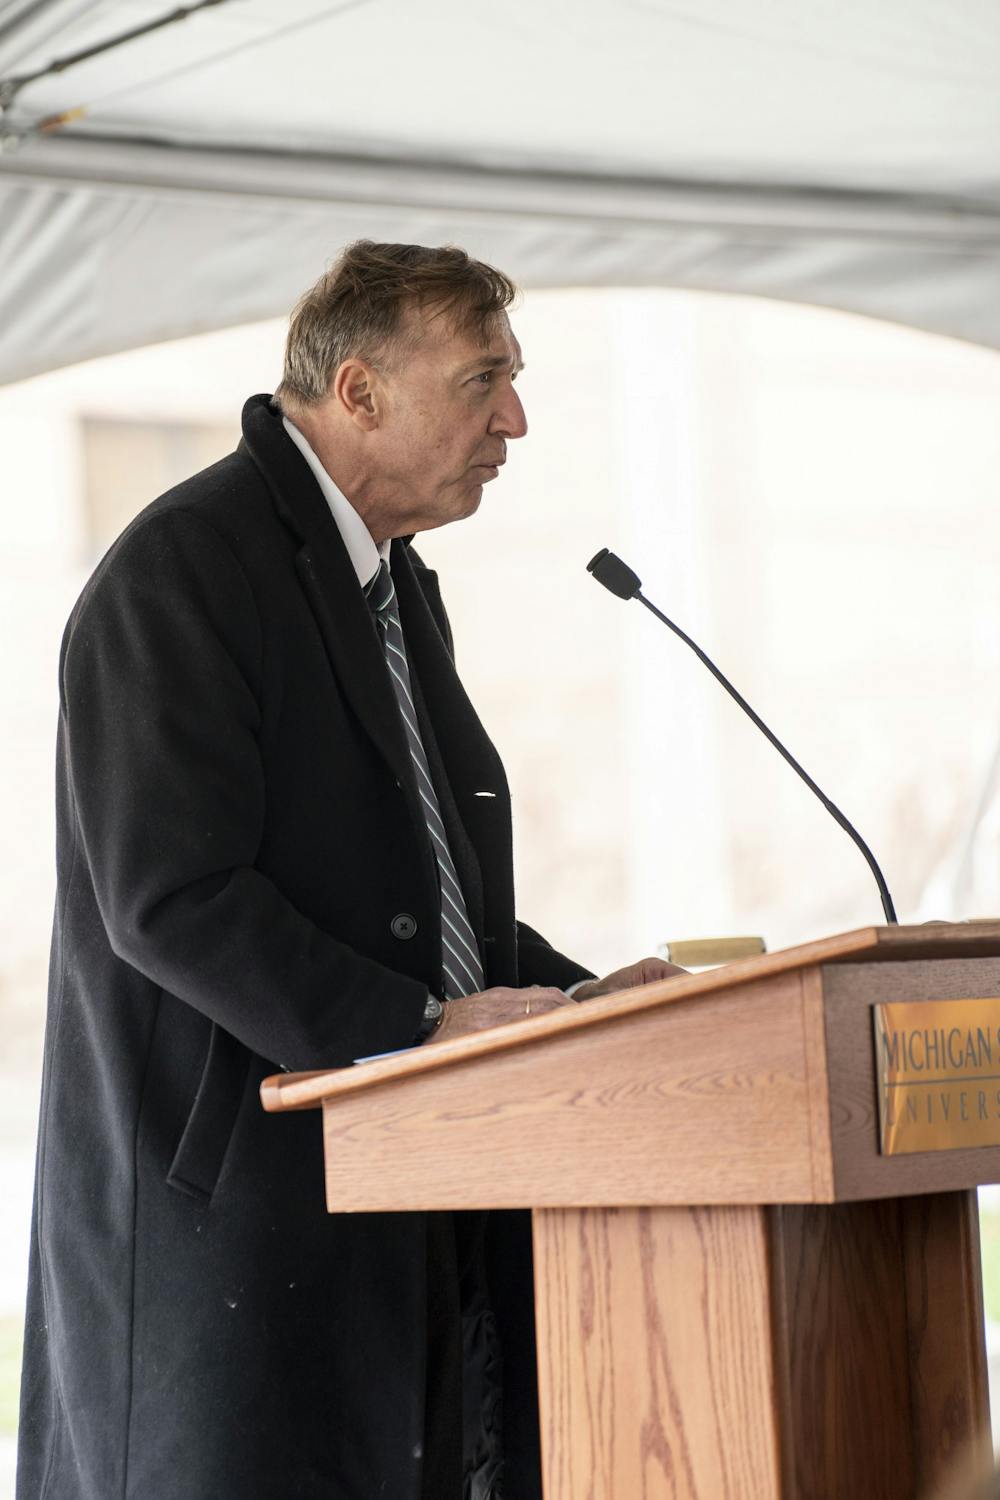 MSU President Samuel L. Stanley Jr. speaking at the ground breaking for the new Packaging Building on MSU's campus on April 19, 2022.